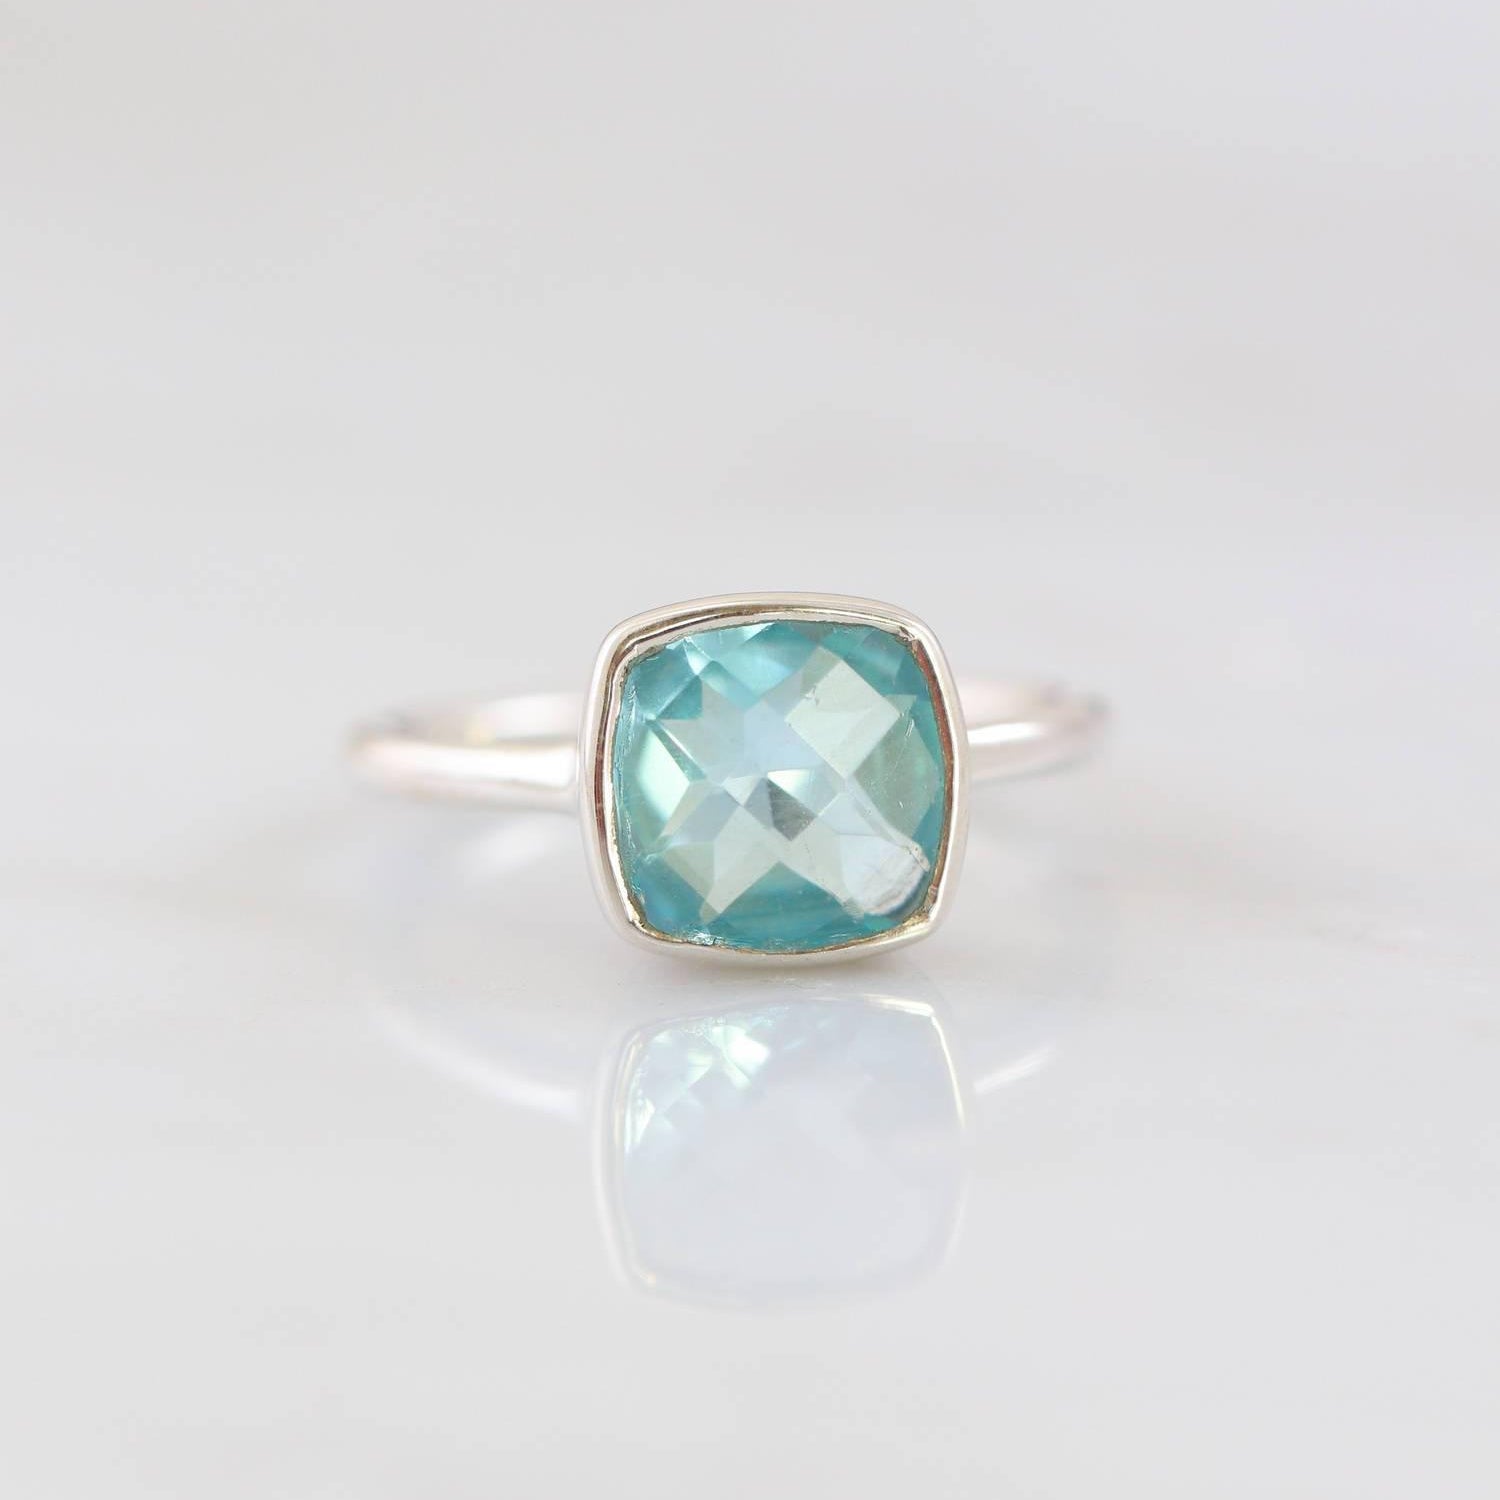 Wedding Ring, March Birthstone Ring, Aquamarine rings, Blue stone Stackable rings, Bridesmaid silver ring, Cushion cut ring, ring for mom